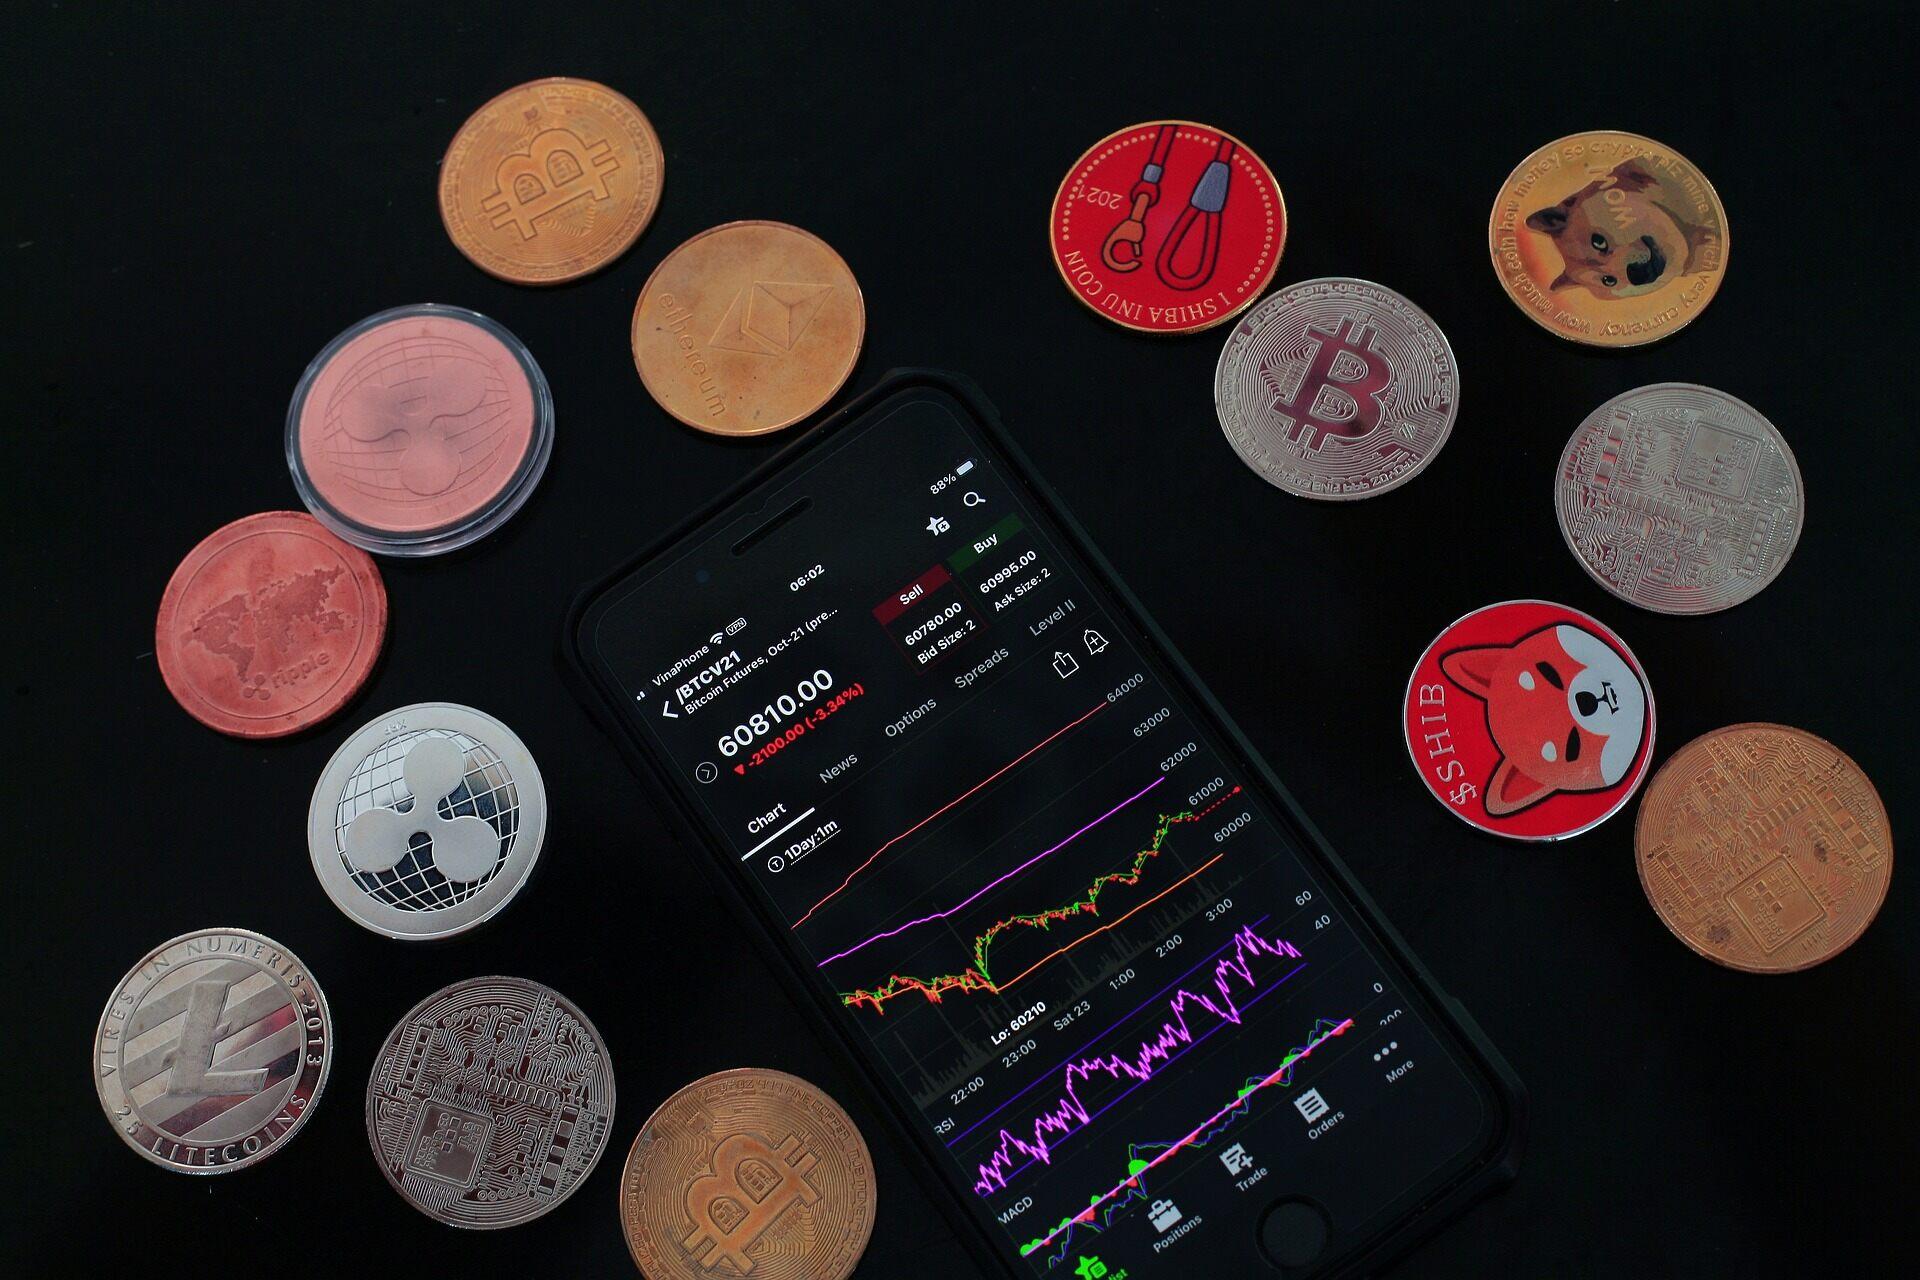 Fourteen different crypto shiny coins in the colors of gold, silver, and red next to an Apple iPhone that is showing the market.